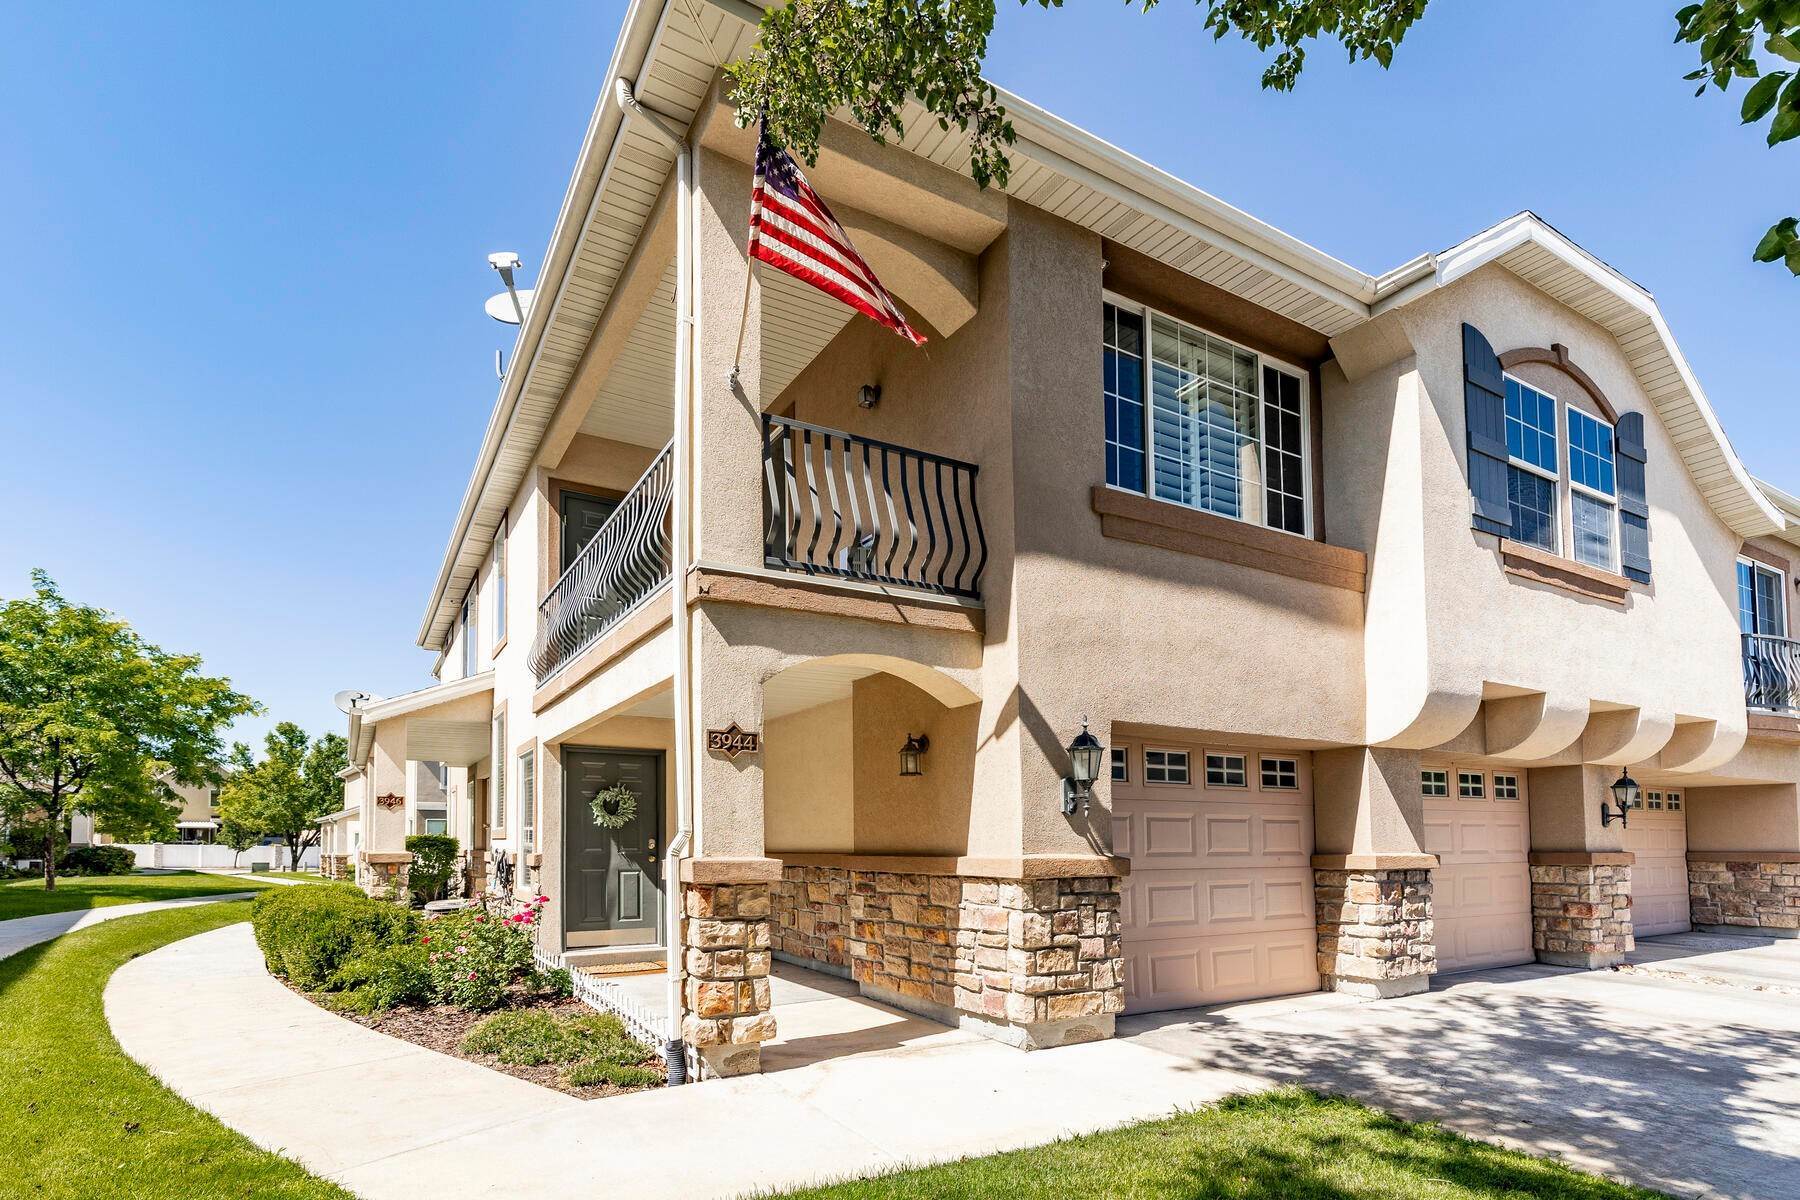 Townhouse for Sale at Discover This West Jordan End-Unit Condo's Perfect Blend of Convenience & Charm 3944 W Spencer Crest Lane West Jordan, Utah 84084 United States